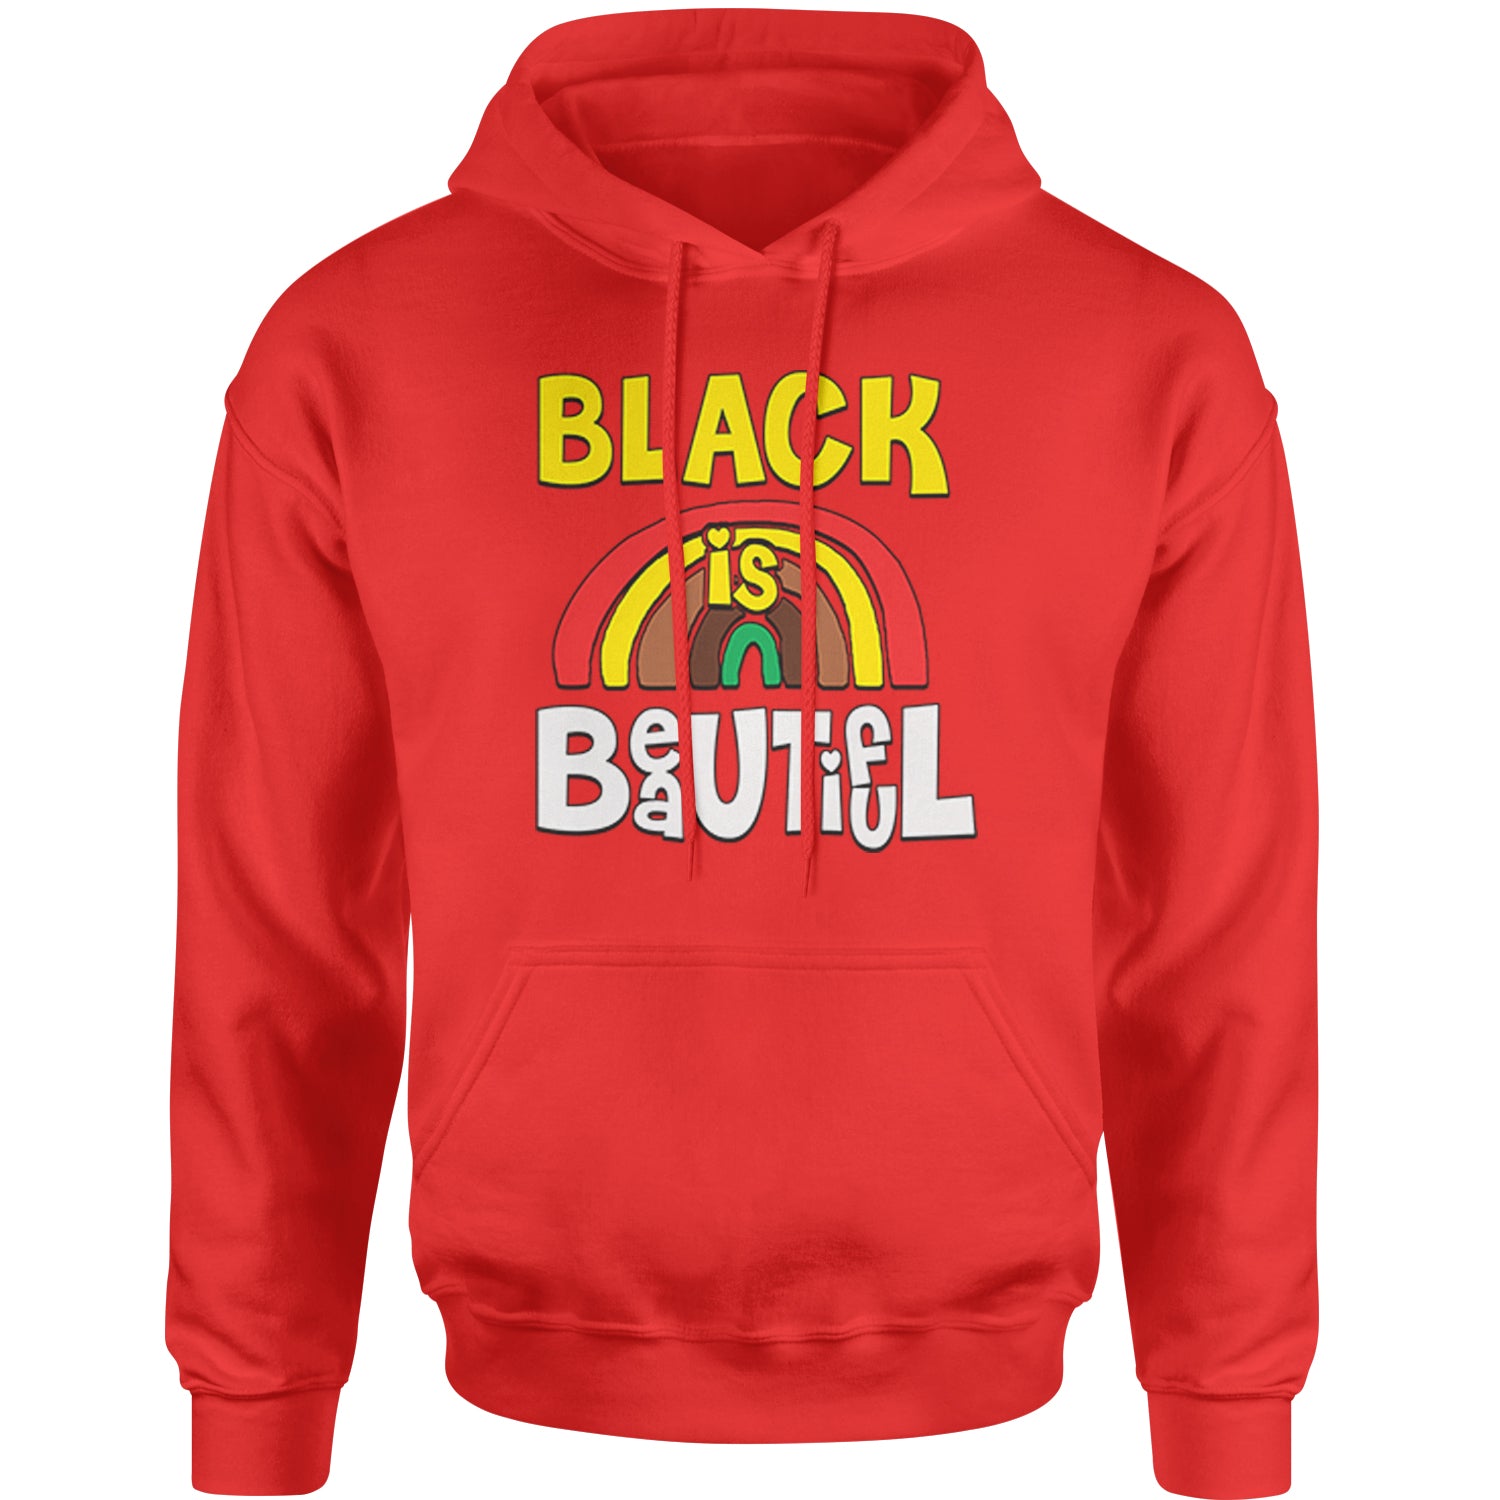 Black Is Beautiful Rainbow Adult Hoodie Sweatshirt african, africanamerican, american, black, blackpride, blm, harriet, king, lives, luther, malcolm, march, martin, matter, parks, protest, rosa, tubman, x by Expression Tees